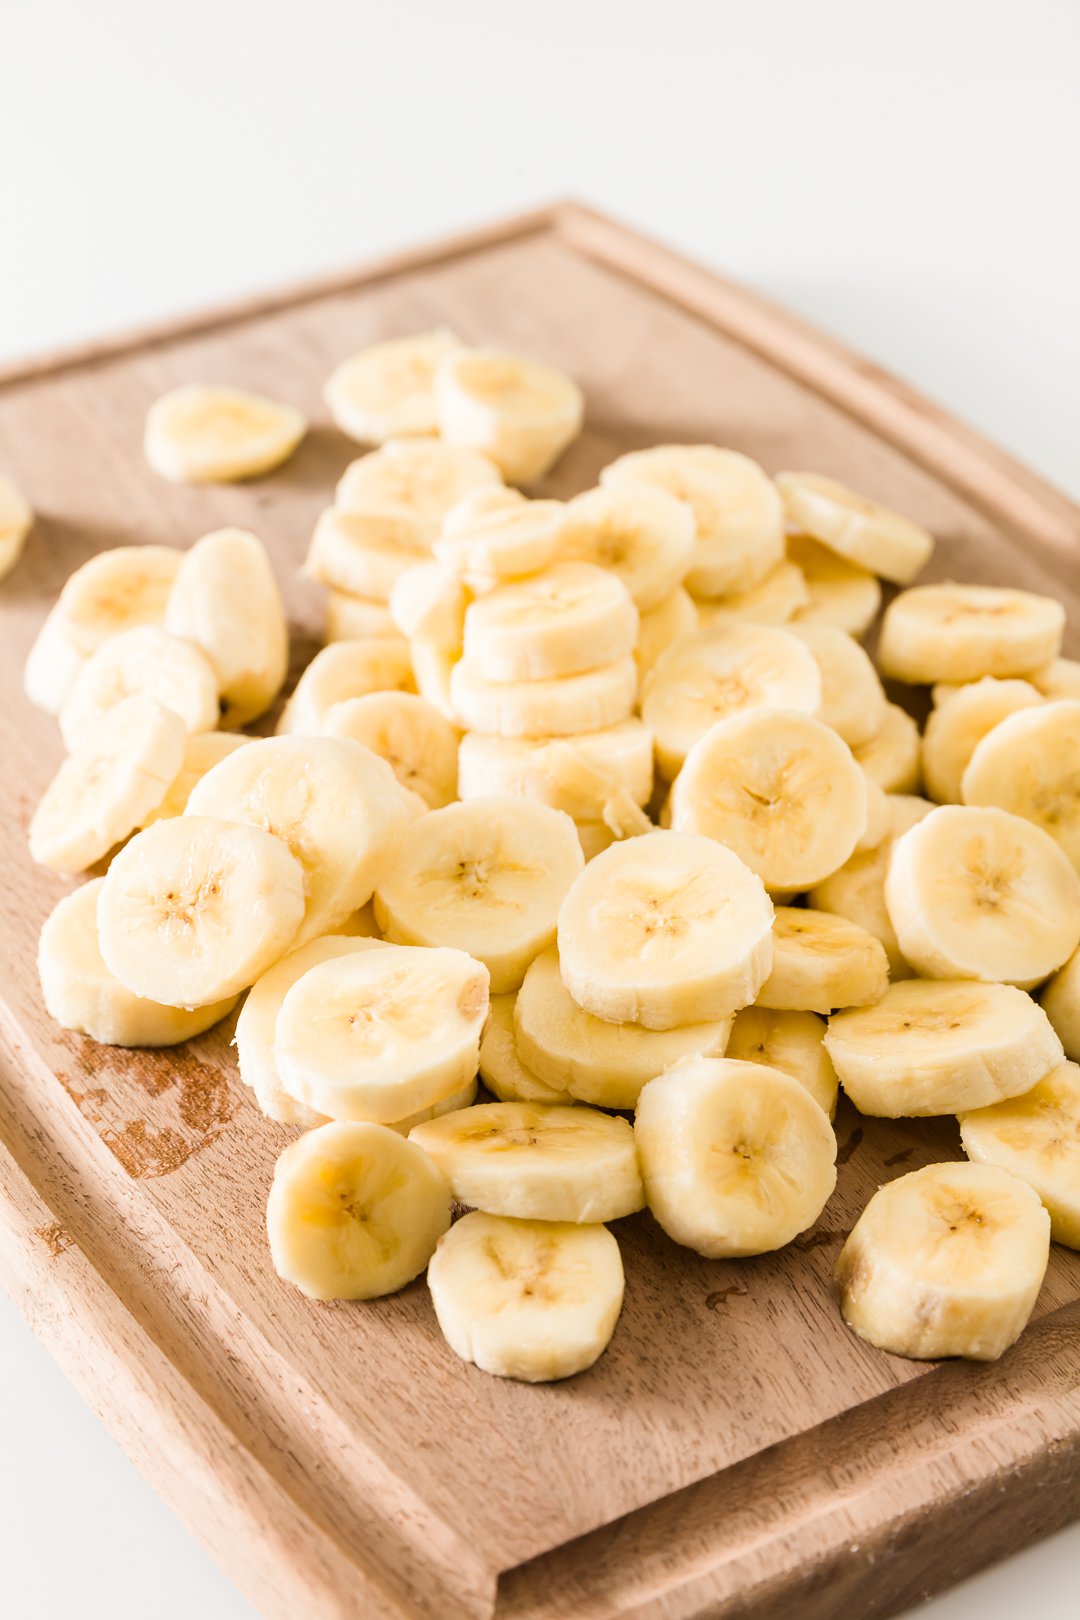 A board filled with chopped bananas